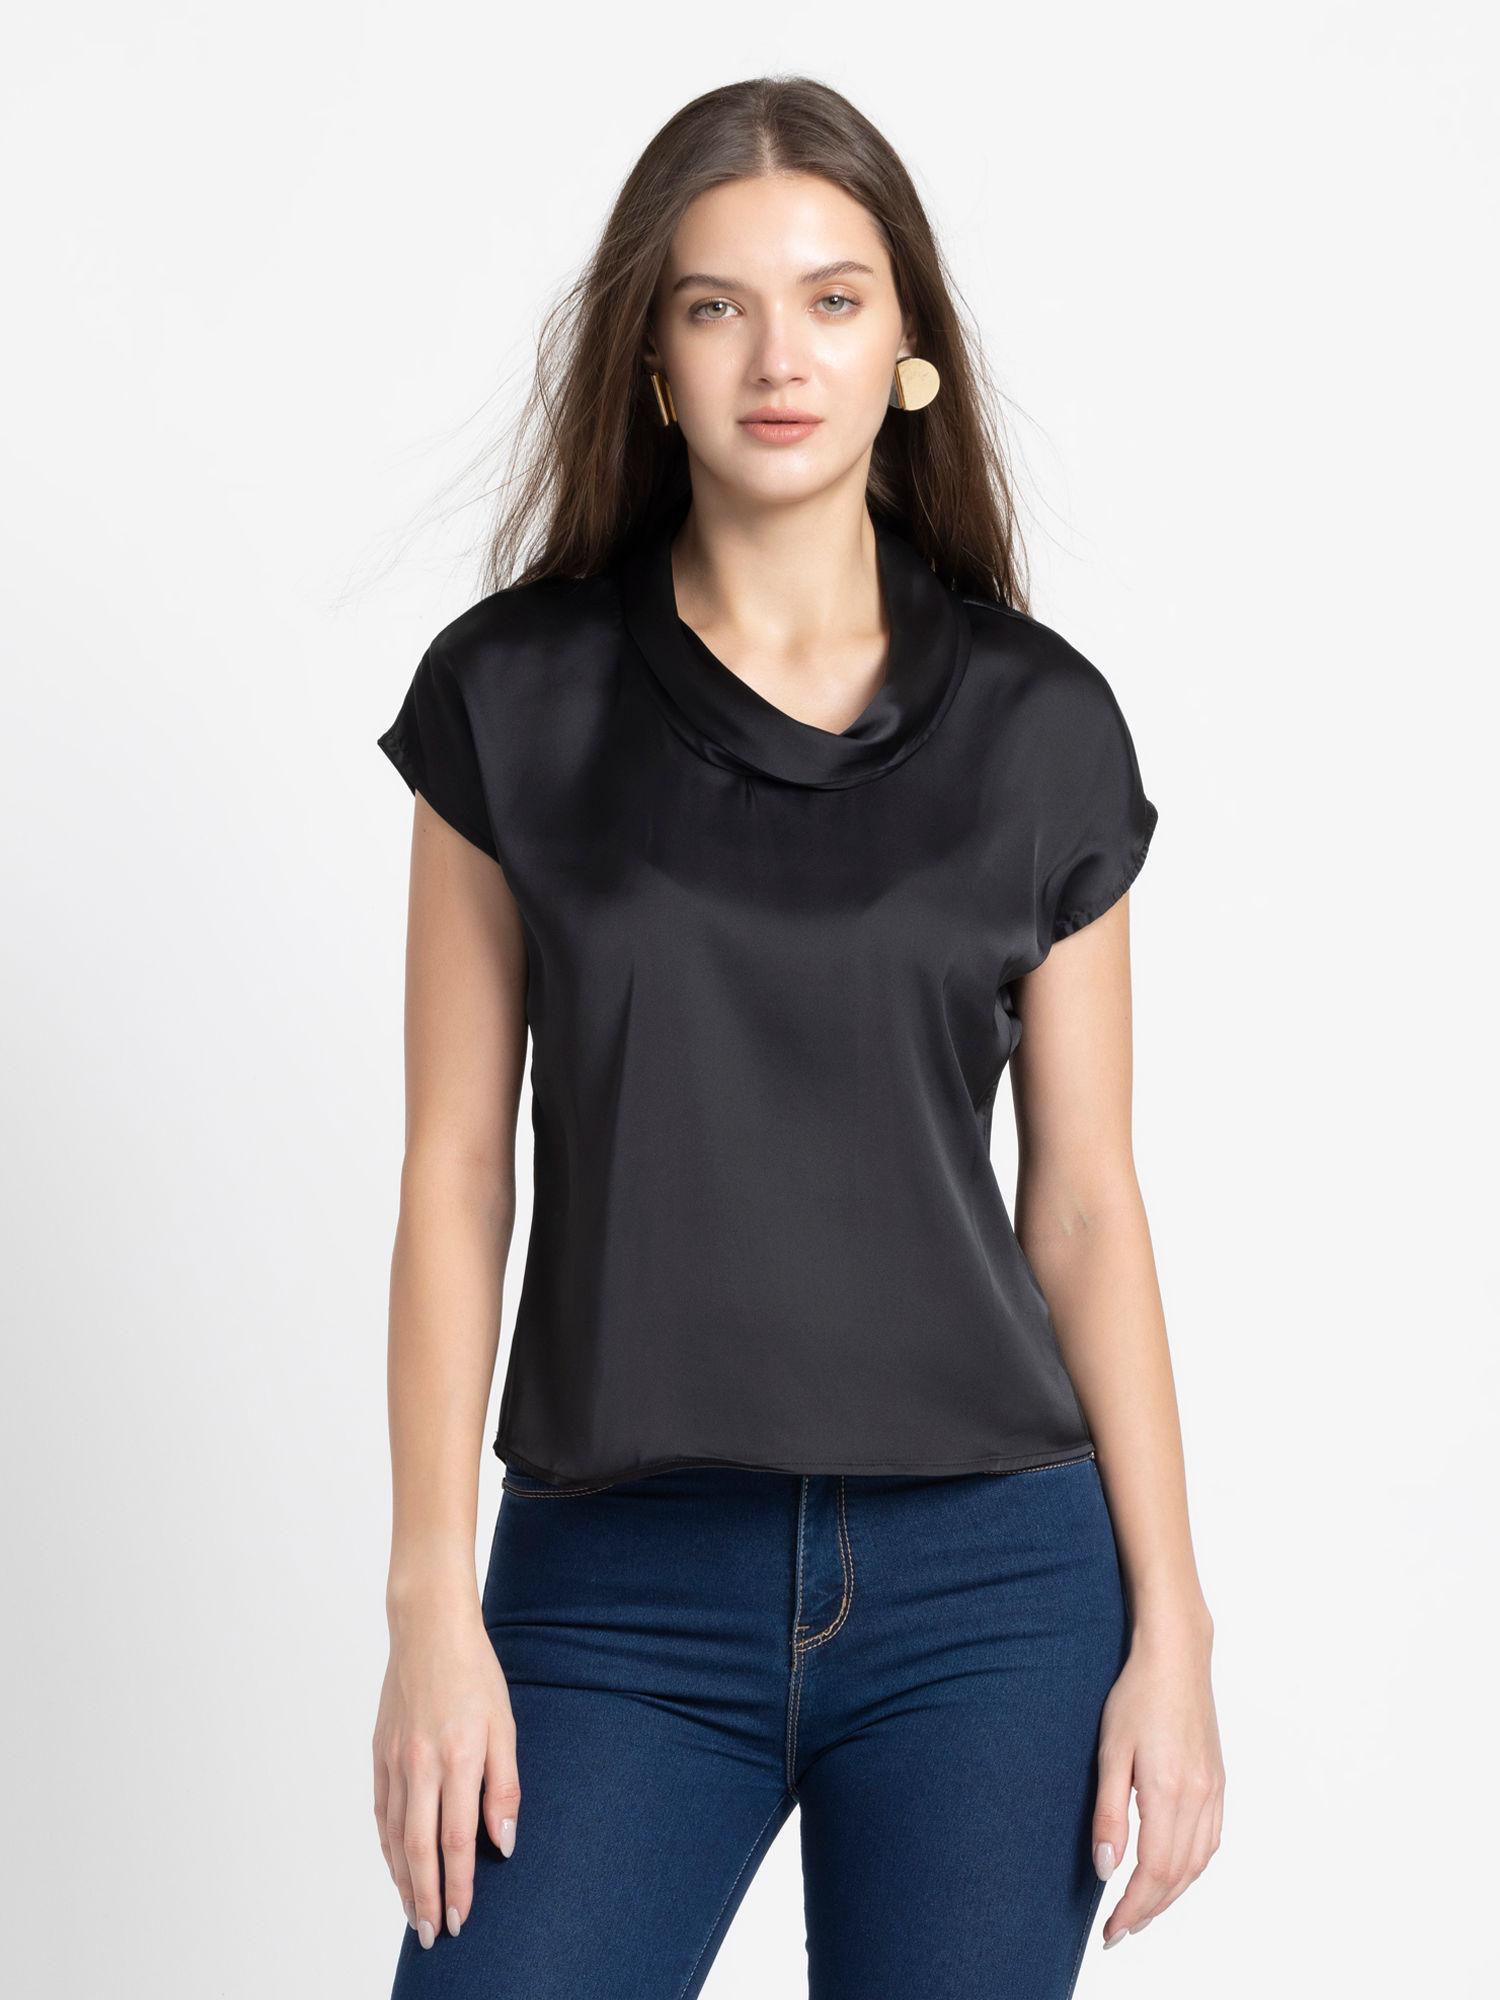 cowl neck black solid half sleeves casual top for women